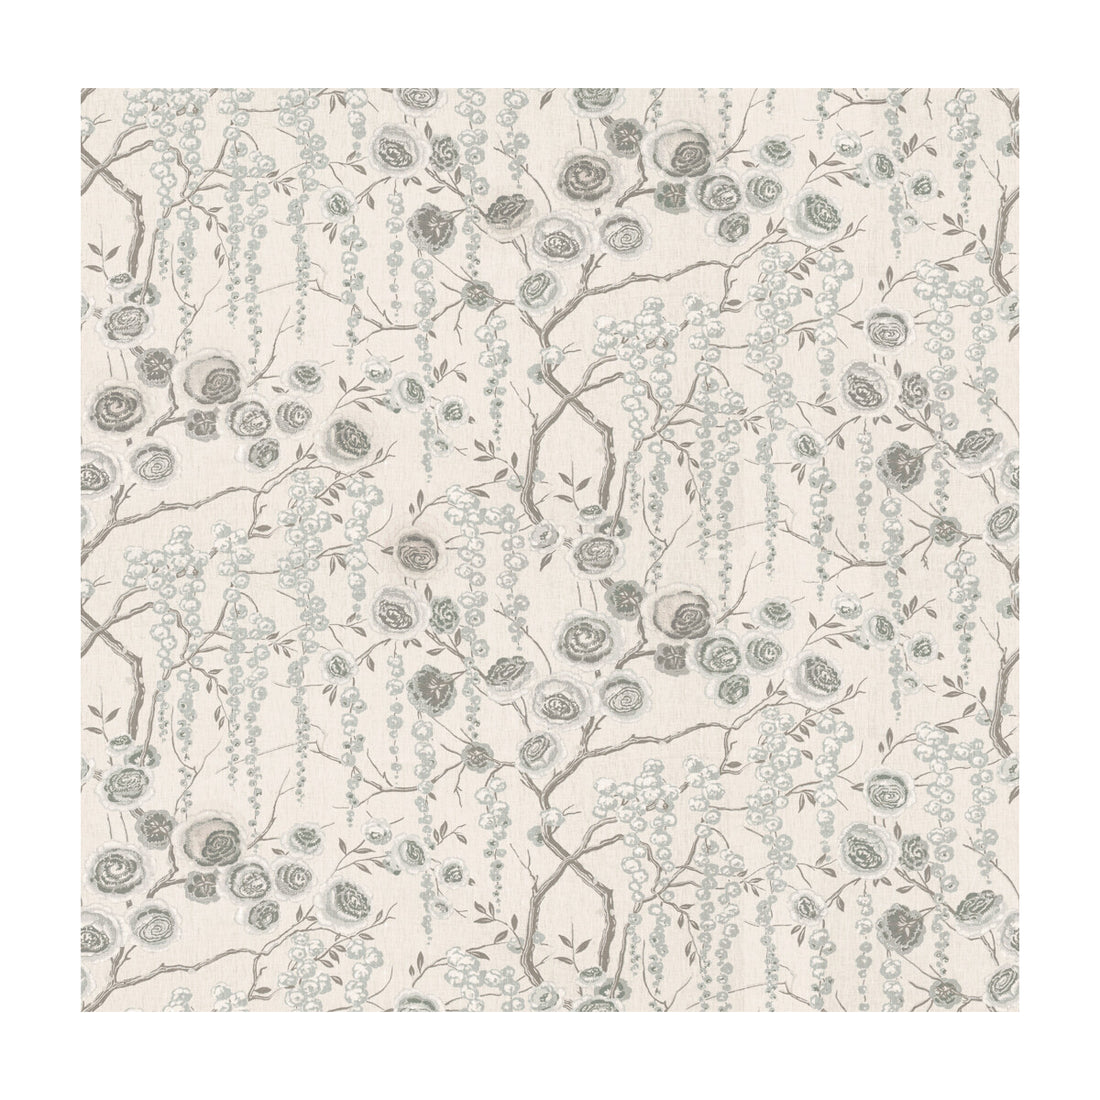 Peonytree fabric in silver color - pattern PEONYTREE.11.0 - by Kravet Basics in the Sarah Richardson Harmony collection